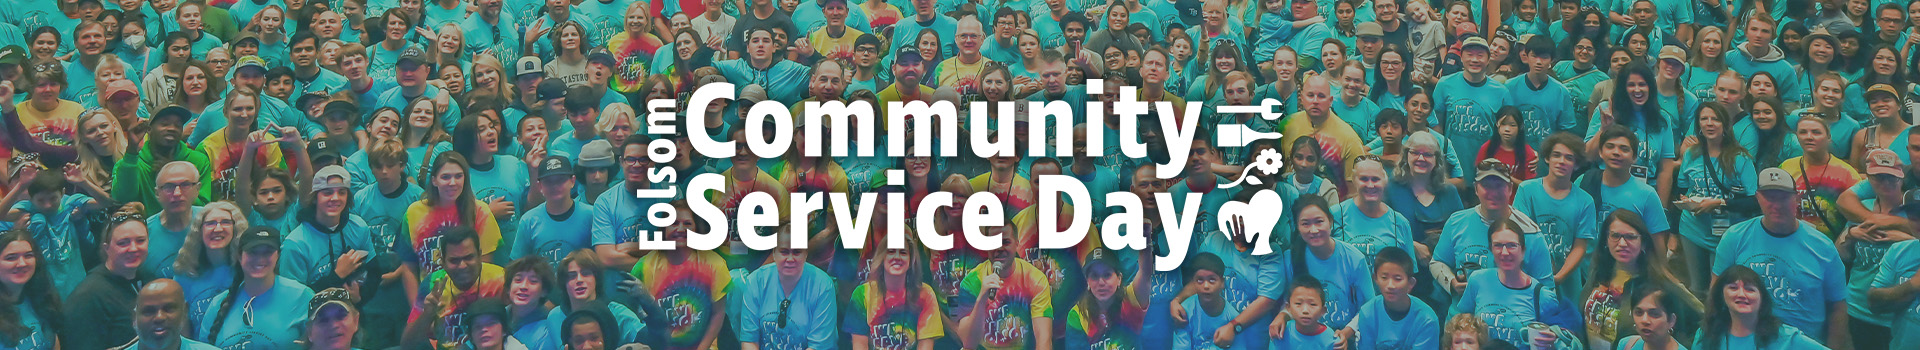 Community Service Day volunteer group photo with logo overlay